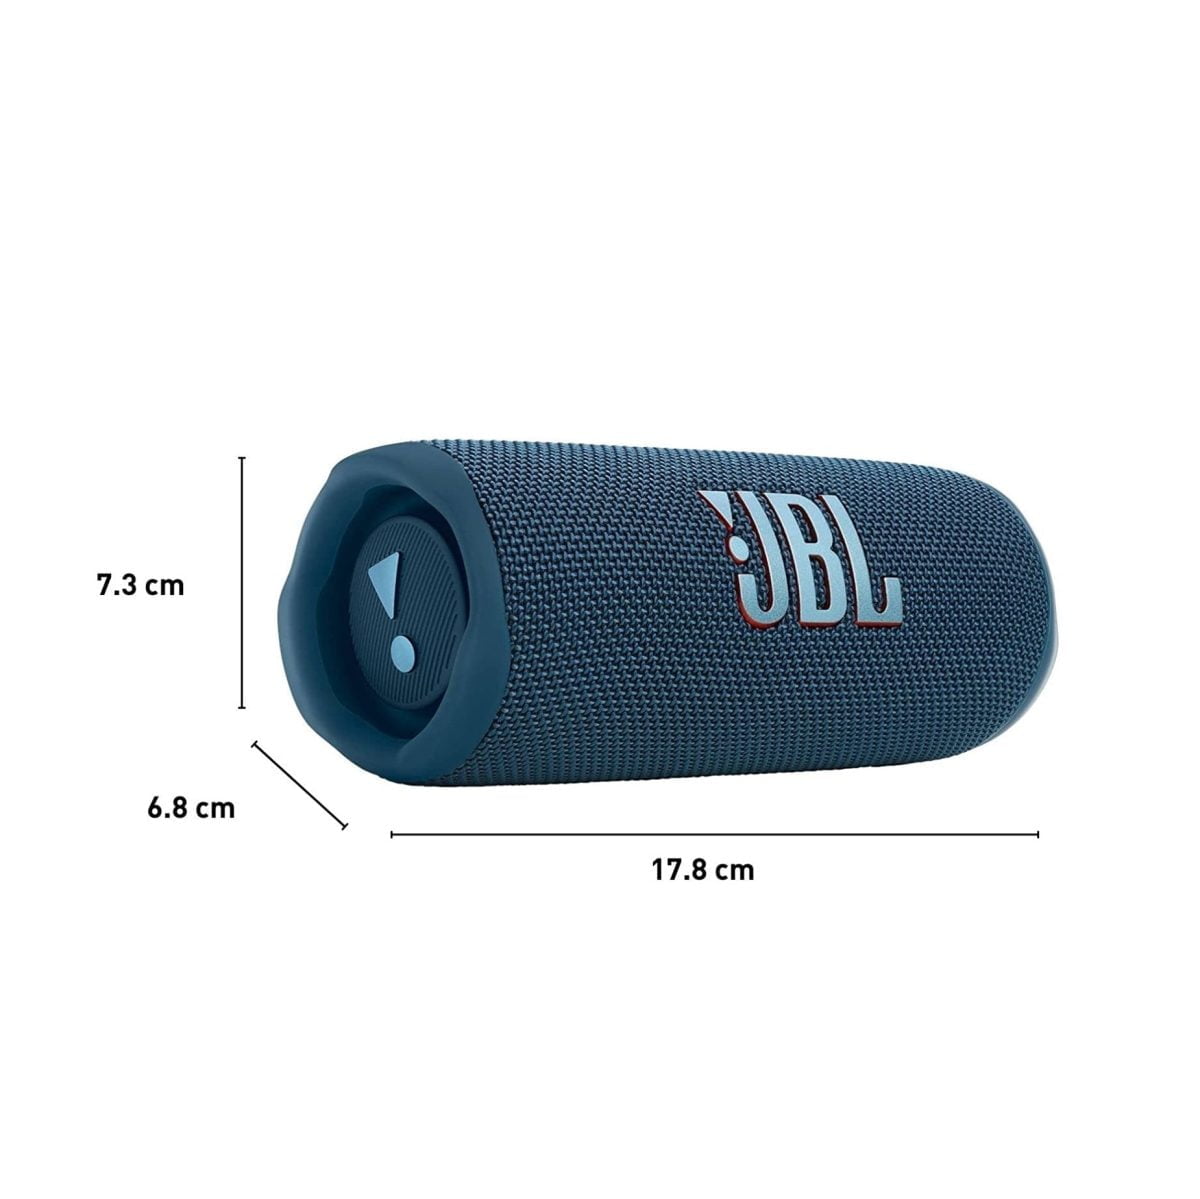 71Nbhjjgnpl. Ac Sl1500 Jbl &Lt;H1&Gt;Jbl Flip 6 Portable Bluetooth Wireless Speaker - Blue&Lt;/H1&Gt; Https://Www.youtube.com/Watch?V=F6Waogaxhme Bold Sound For Every Adventure. Your Adventure. Your Soundtrack. The Bold New Jbl Flip 6 Delivers Powerful Jbl Original Pro Sound With Exceptional Clarity Thanks To Its 2-Way Speaker System Consisting Of An Optimized Racetrack-Shaped Driver, Separate Tweeter, And Dual Pumping Bass Radiators. This Big-Sounding, Yet Easy To Carry Speaker Is Waterproof And Dustproof, So You Can Take It Anywhere In Any Weather. And With 12 Hours Of Battery Life, You Can Party ‘Til The Sun Goes Down—Or Comes Up—Wherever The Music Moves You. Use Partyboost To Link Multiple Compatible Speakers. The Flip 6 Comes In A Variety Of Cool Colors. Jbl Flip5 Jbl Flip 6 Portable Bluetooth Wireless Speaker - Blue